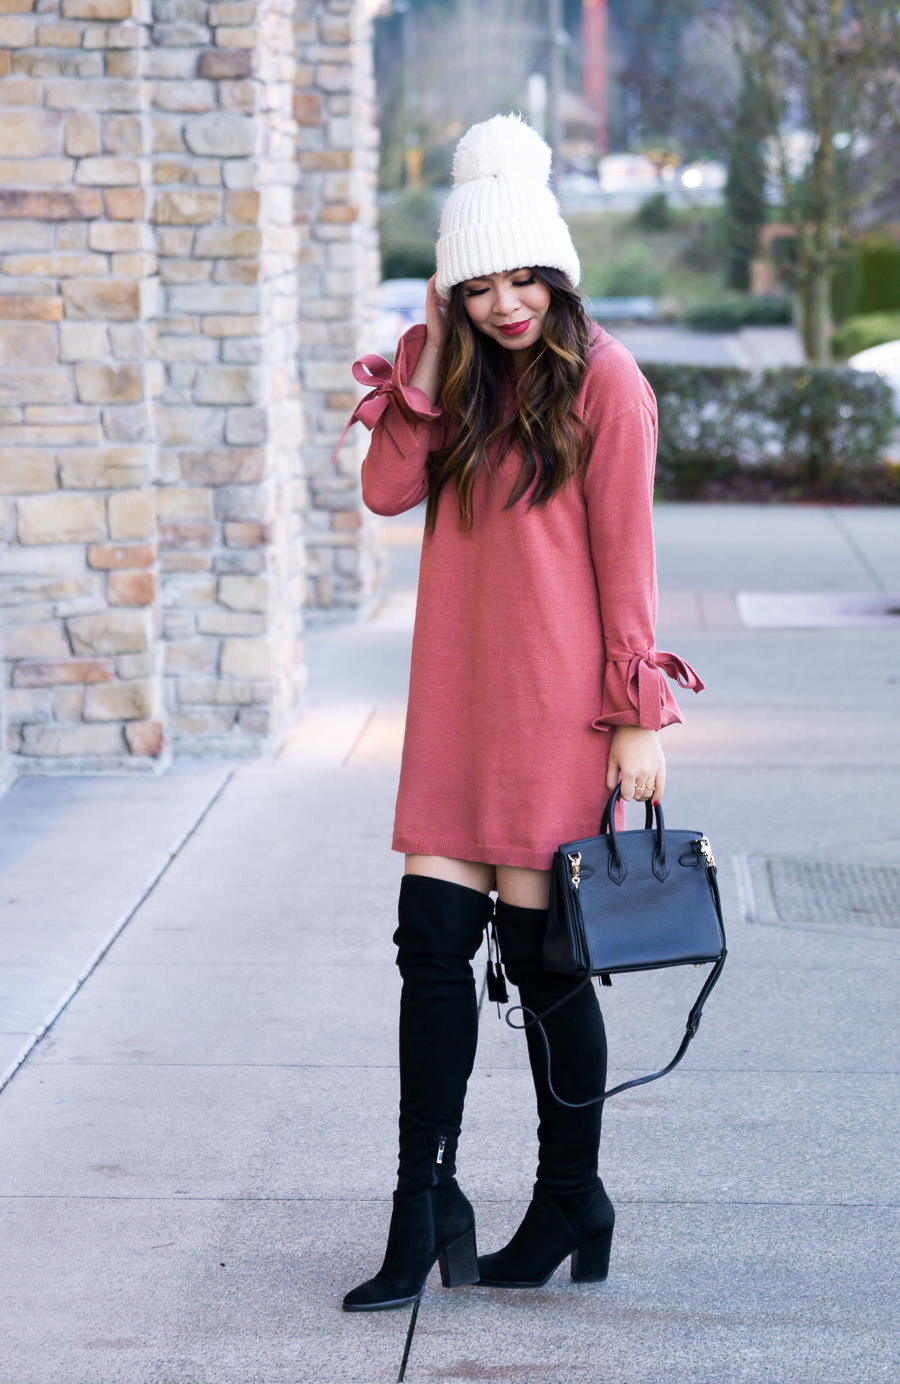 How To Wear Over The Knee Boots, 3 